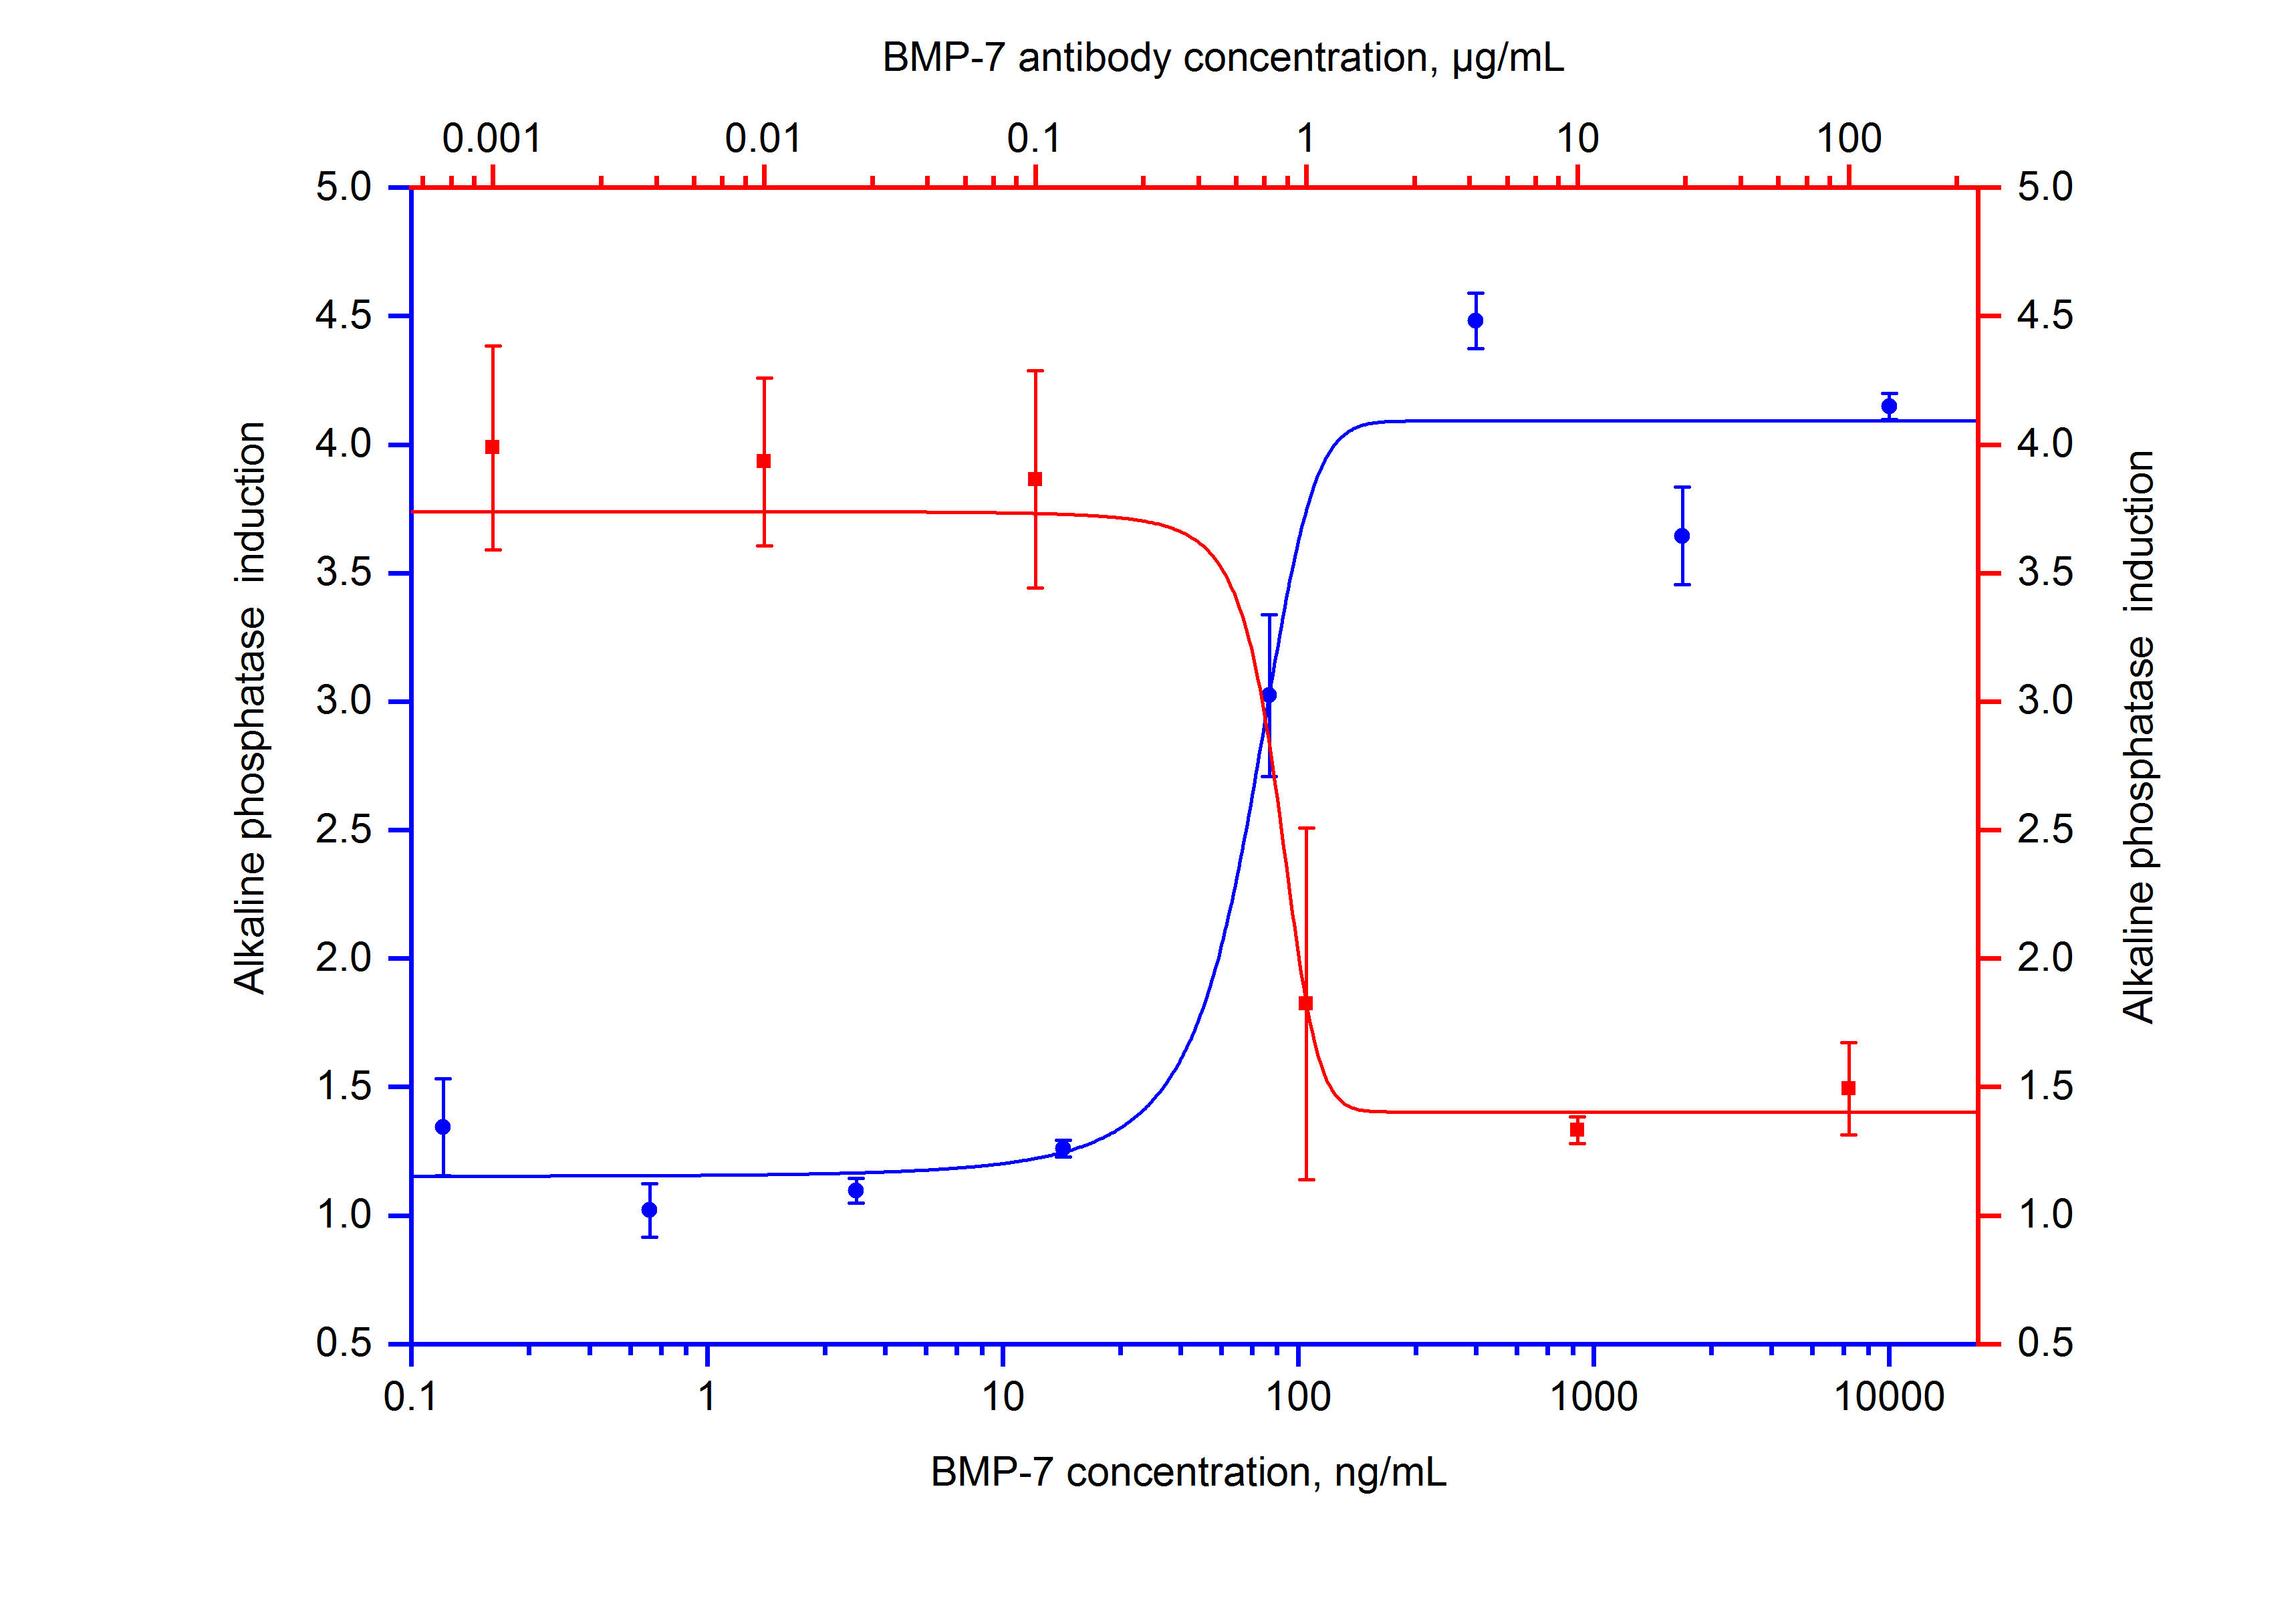 Recombinant human BMP-7 (Cat.NO. HZ-1229) induces alkaline phosphatase production in the ATDC-5 cell line (using pNPP as chromogenic substrate for detection) in a dose dependent manner (blue curve, bottom X-left Y). The activity of human BMP-7 (200 ng/mL HZ-1229) is neutralized by mouse anti-human BMP-7 antibody 69011-1-Ig at serial dose (red curve, refer to top X-right Y). The ND50 is typically 1-2 μg/mL.